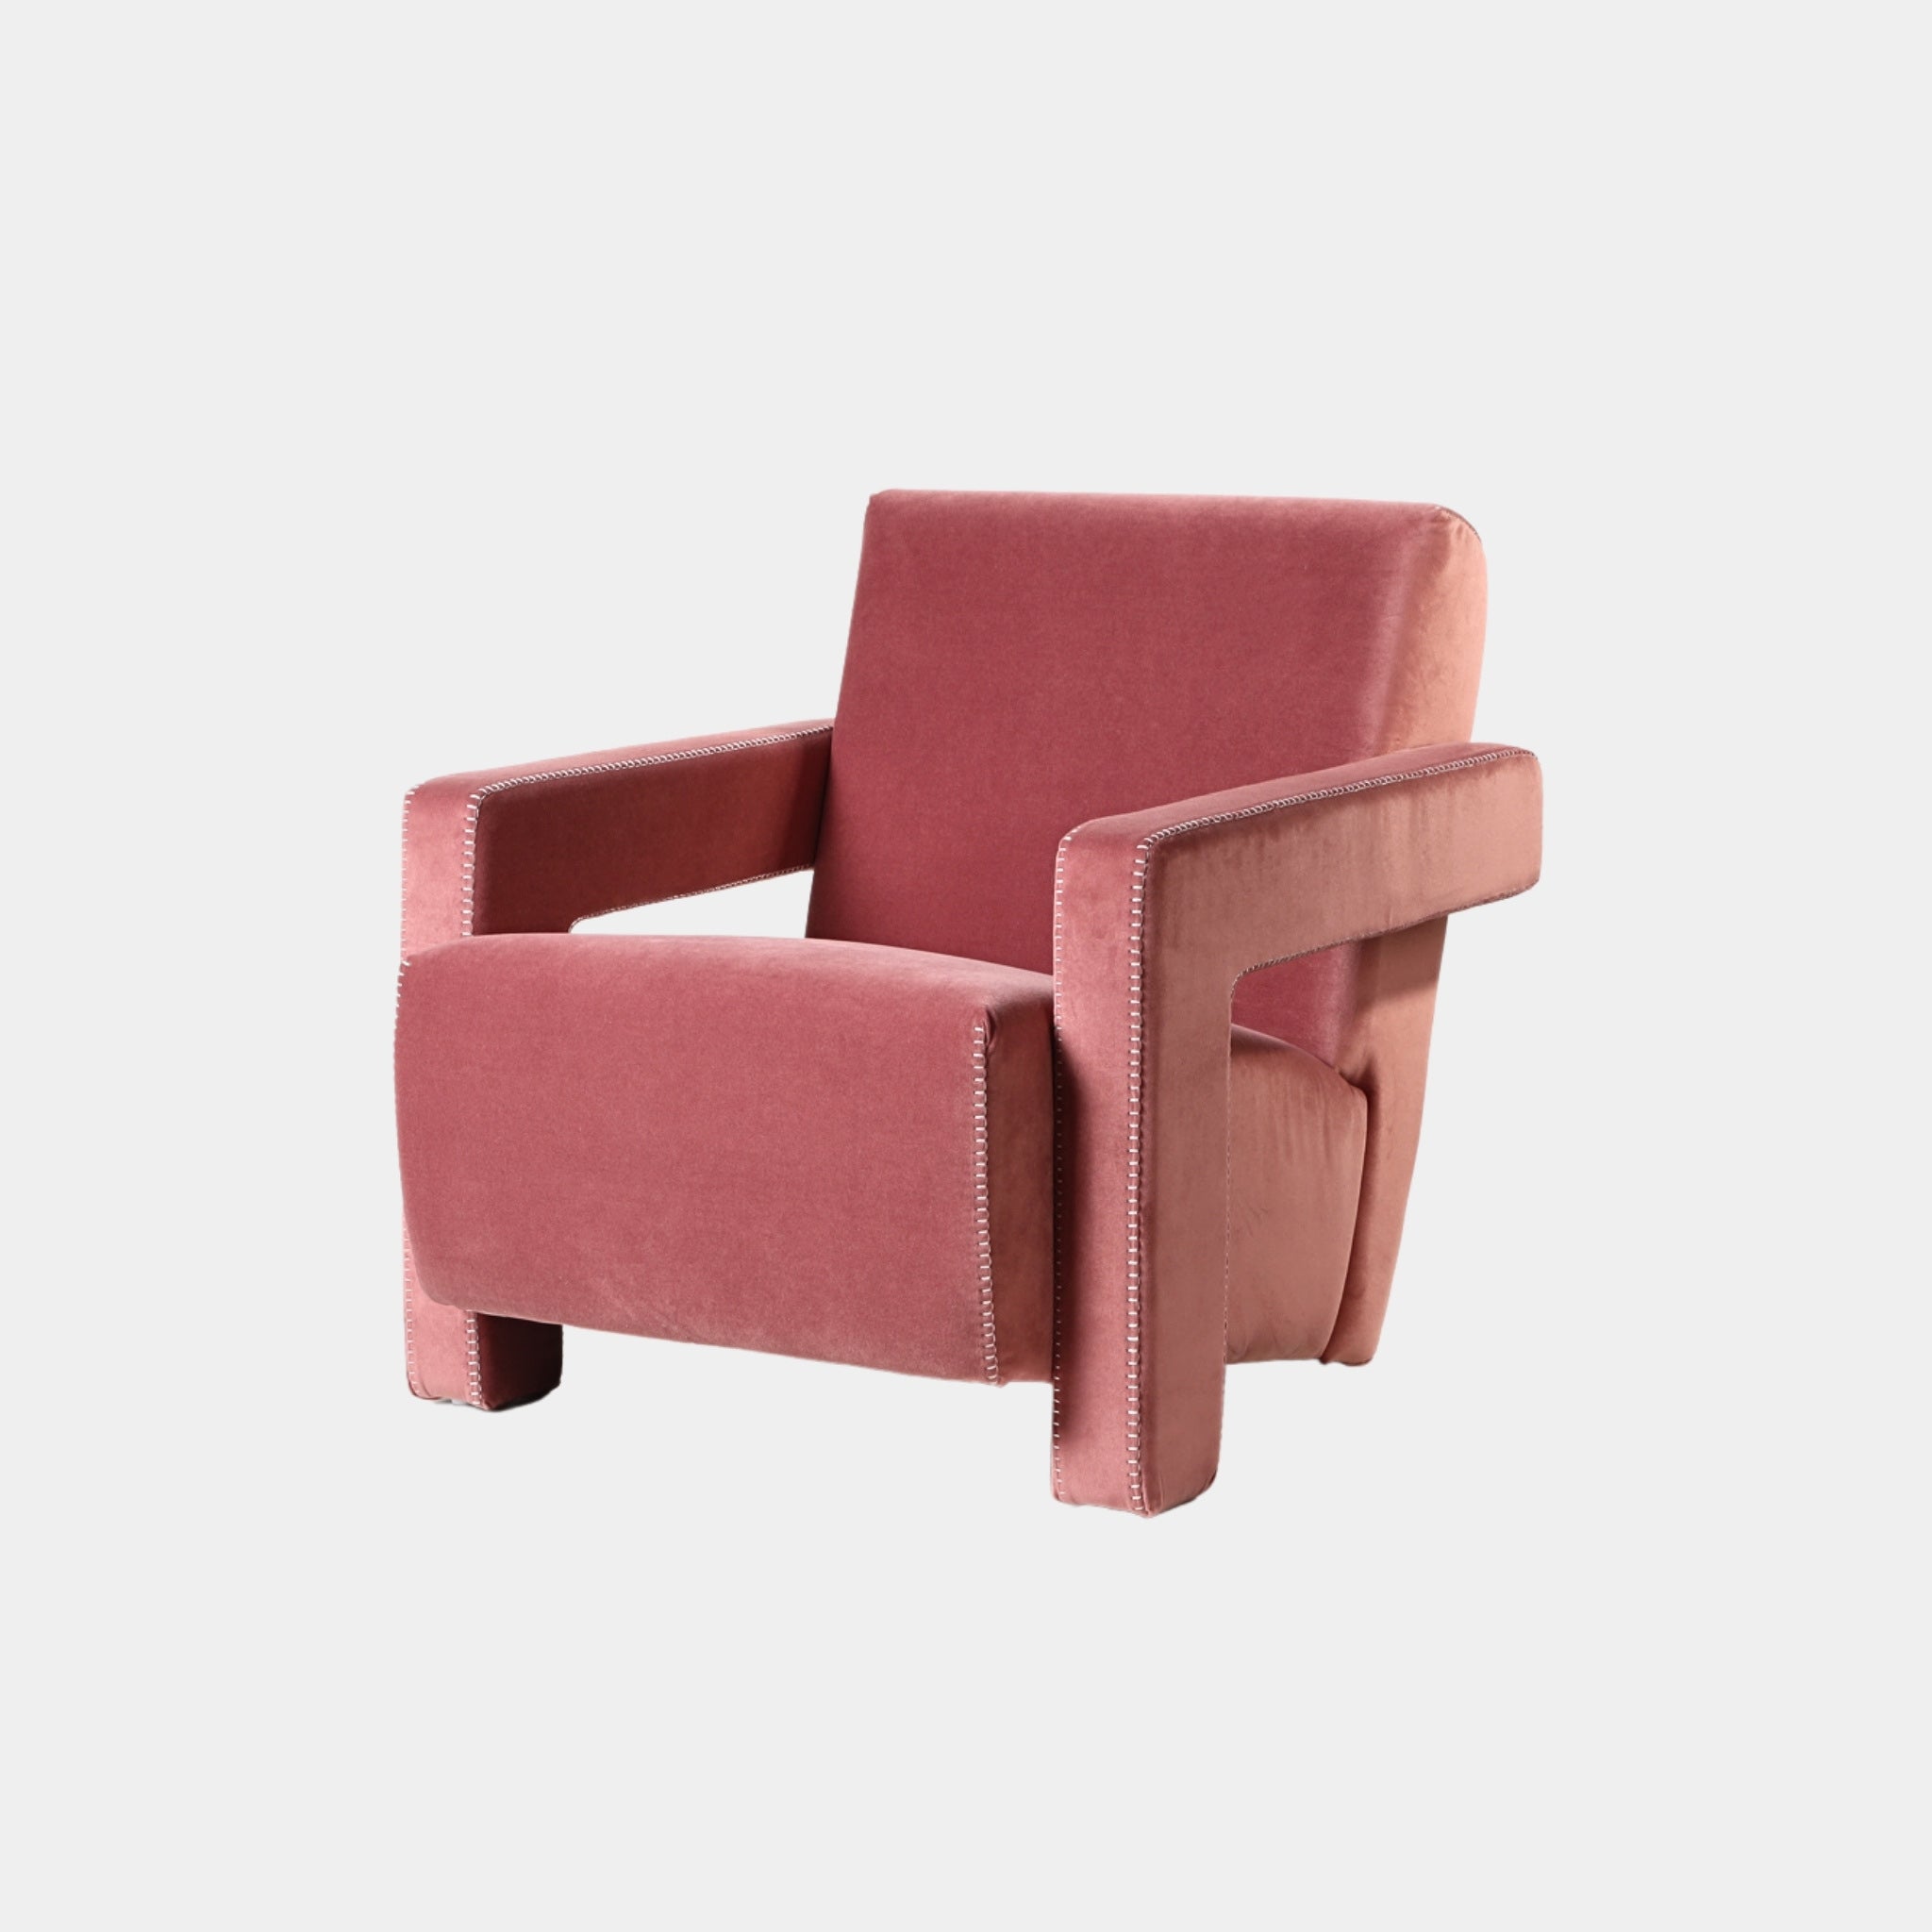 Jagged Upholstered Chair